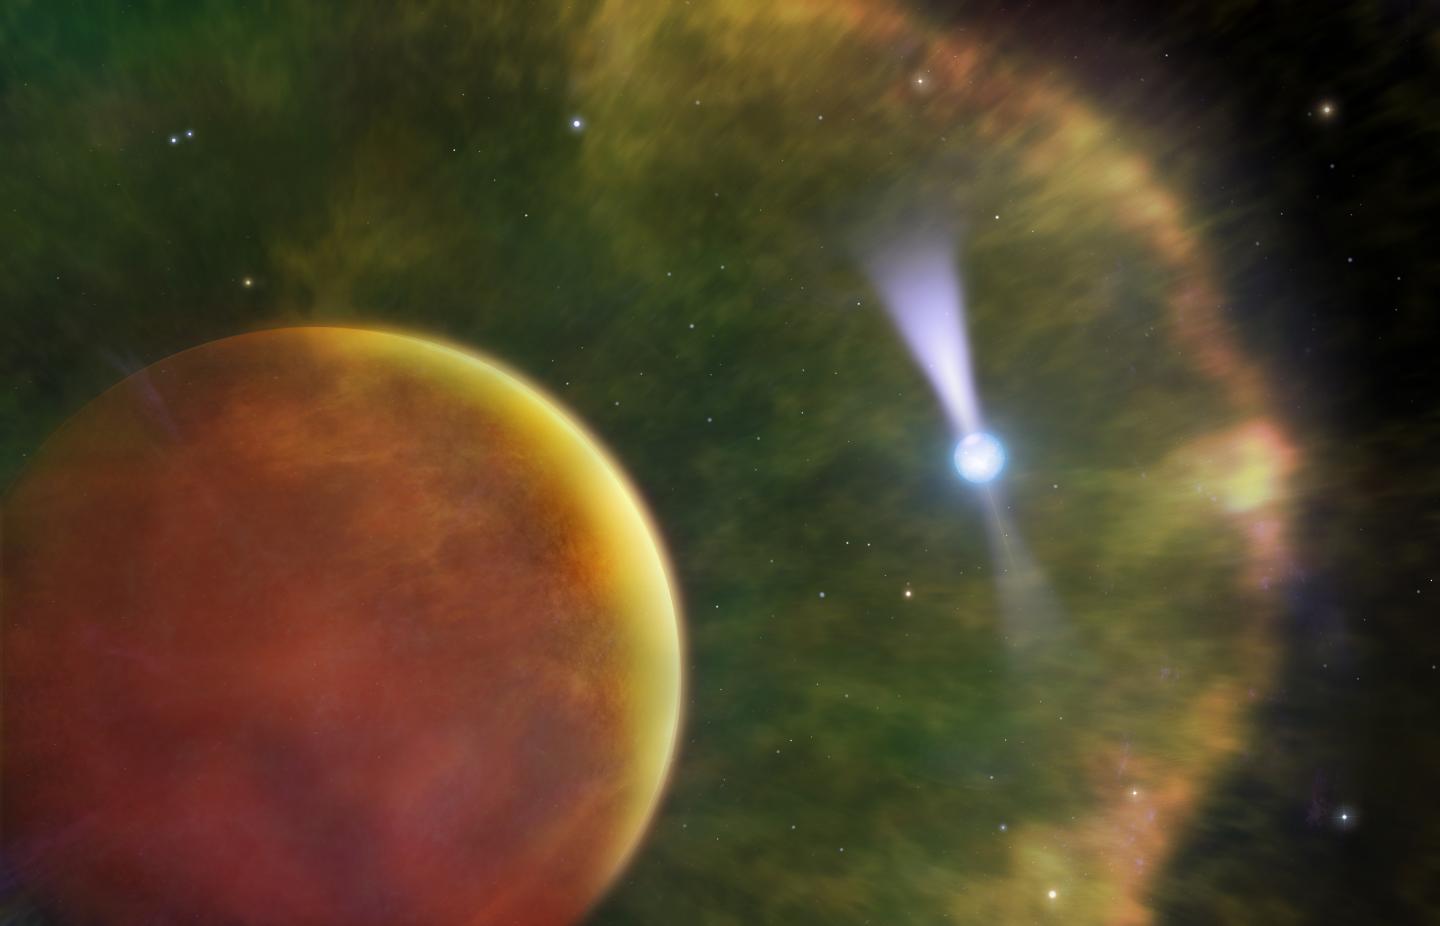 The pulsar PSR B1957+20 is seen in the background through the cloud of gas enveloping its brown dwarf star companion. Courtesy of Dr. Mark A. Garlick; Dunlap Institute for Astronomy & Astrophysics, University of Toronto.